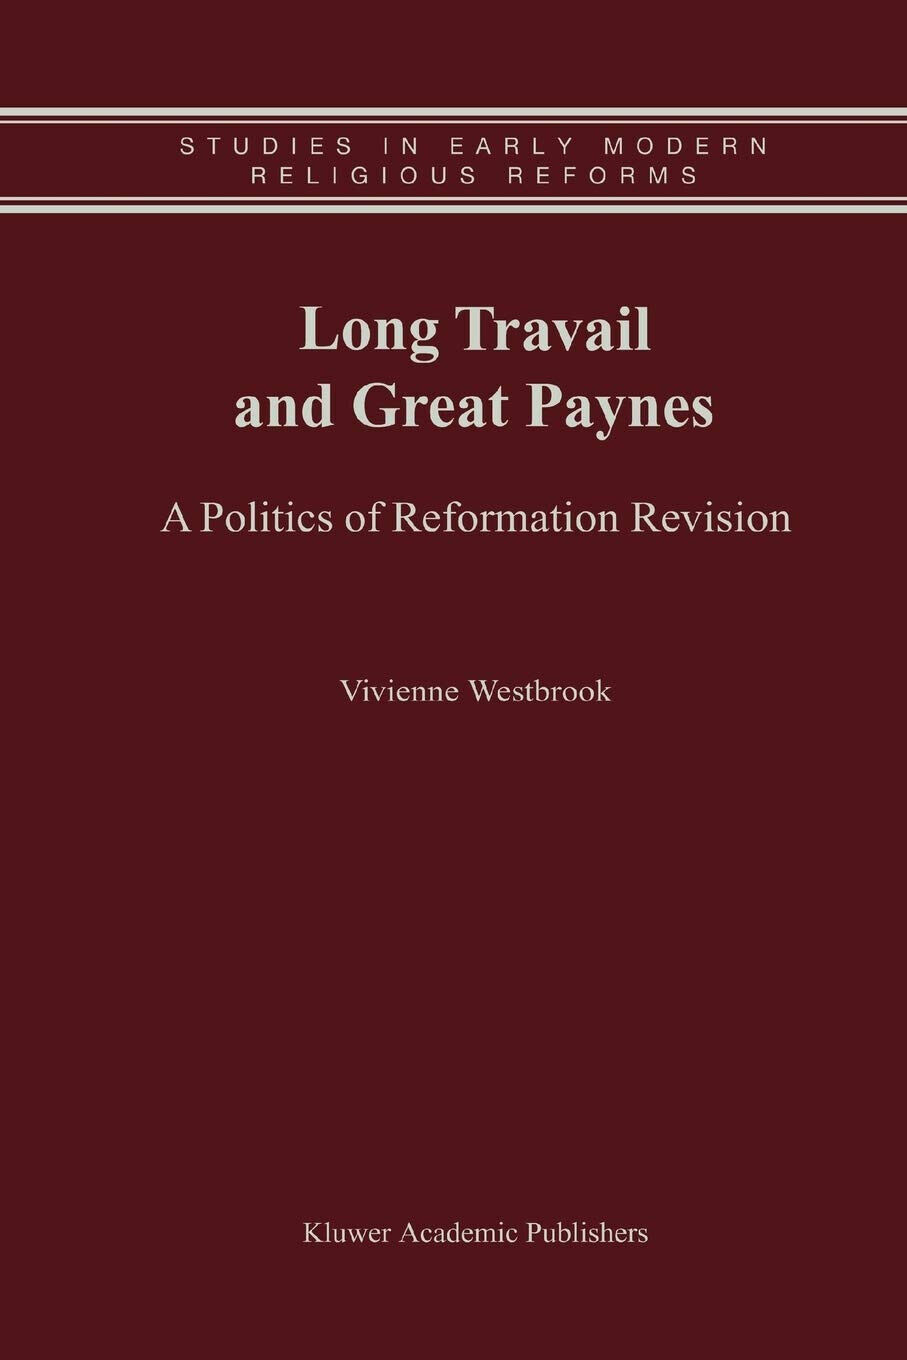 Long Travail and Great Paynes - Vivienne Westbrook - Springer, 2013 libro usato